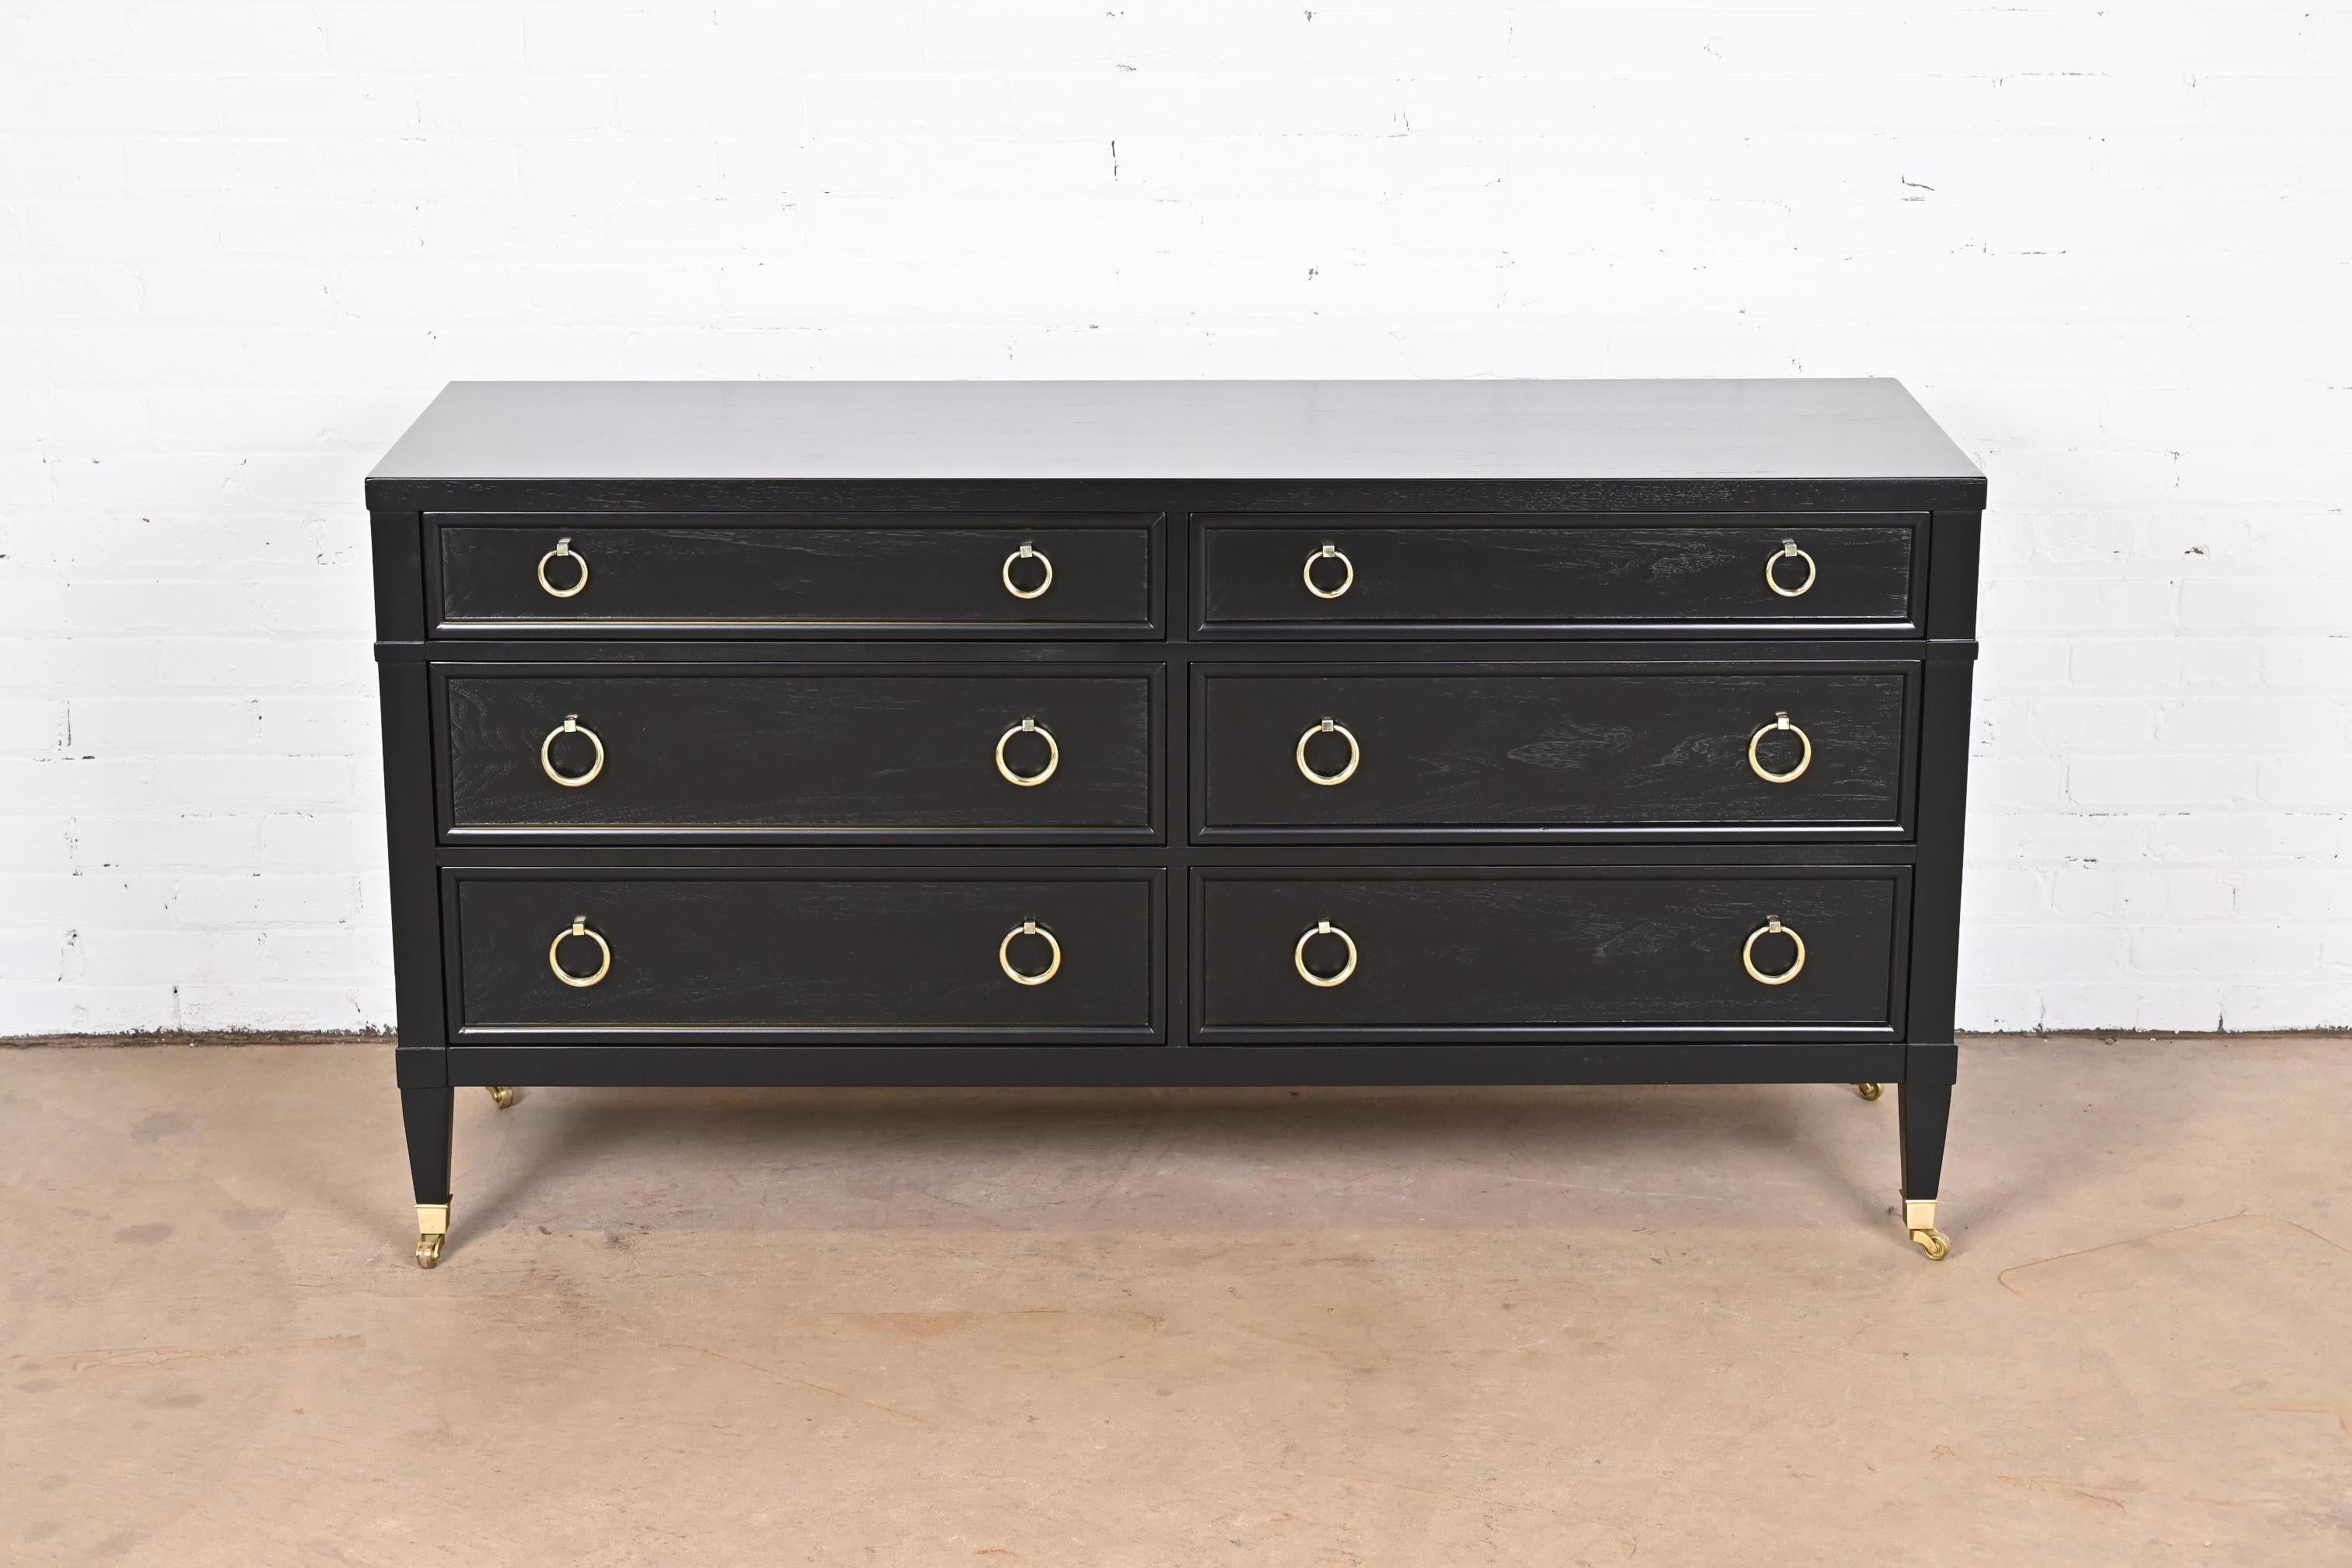 An exceptional Mid-Century French Regency Louis XVI six-drawer dresser or credenza

By Baker Furniture, 